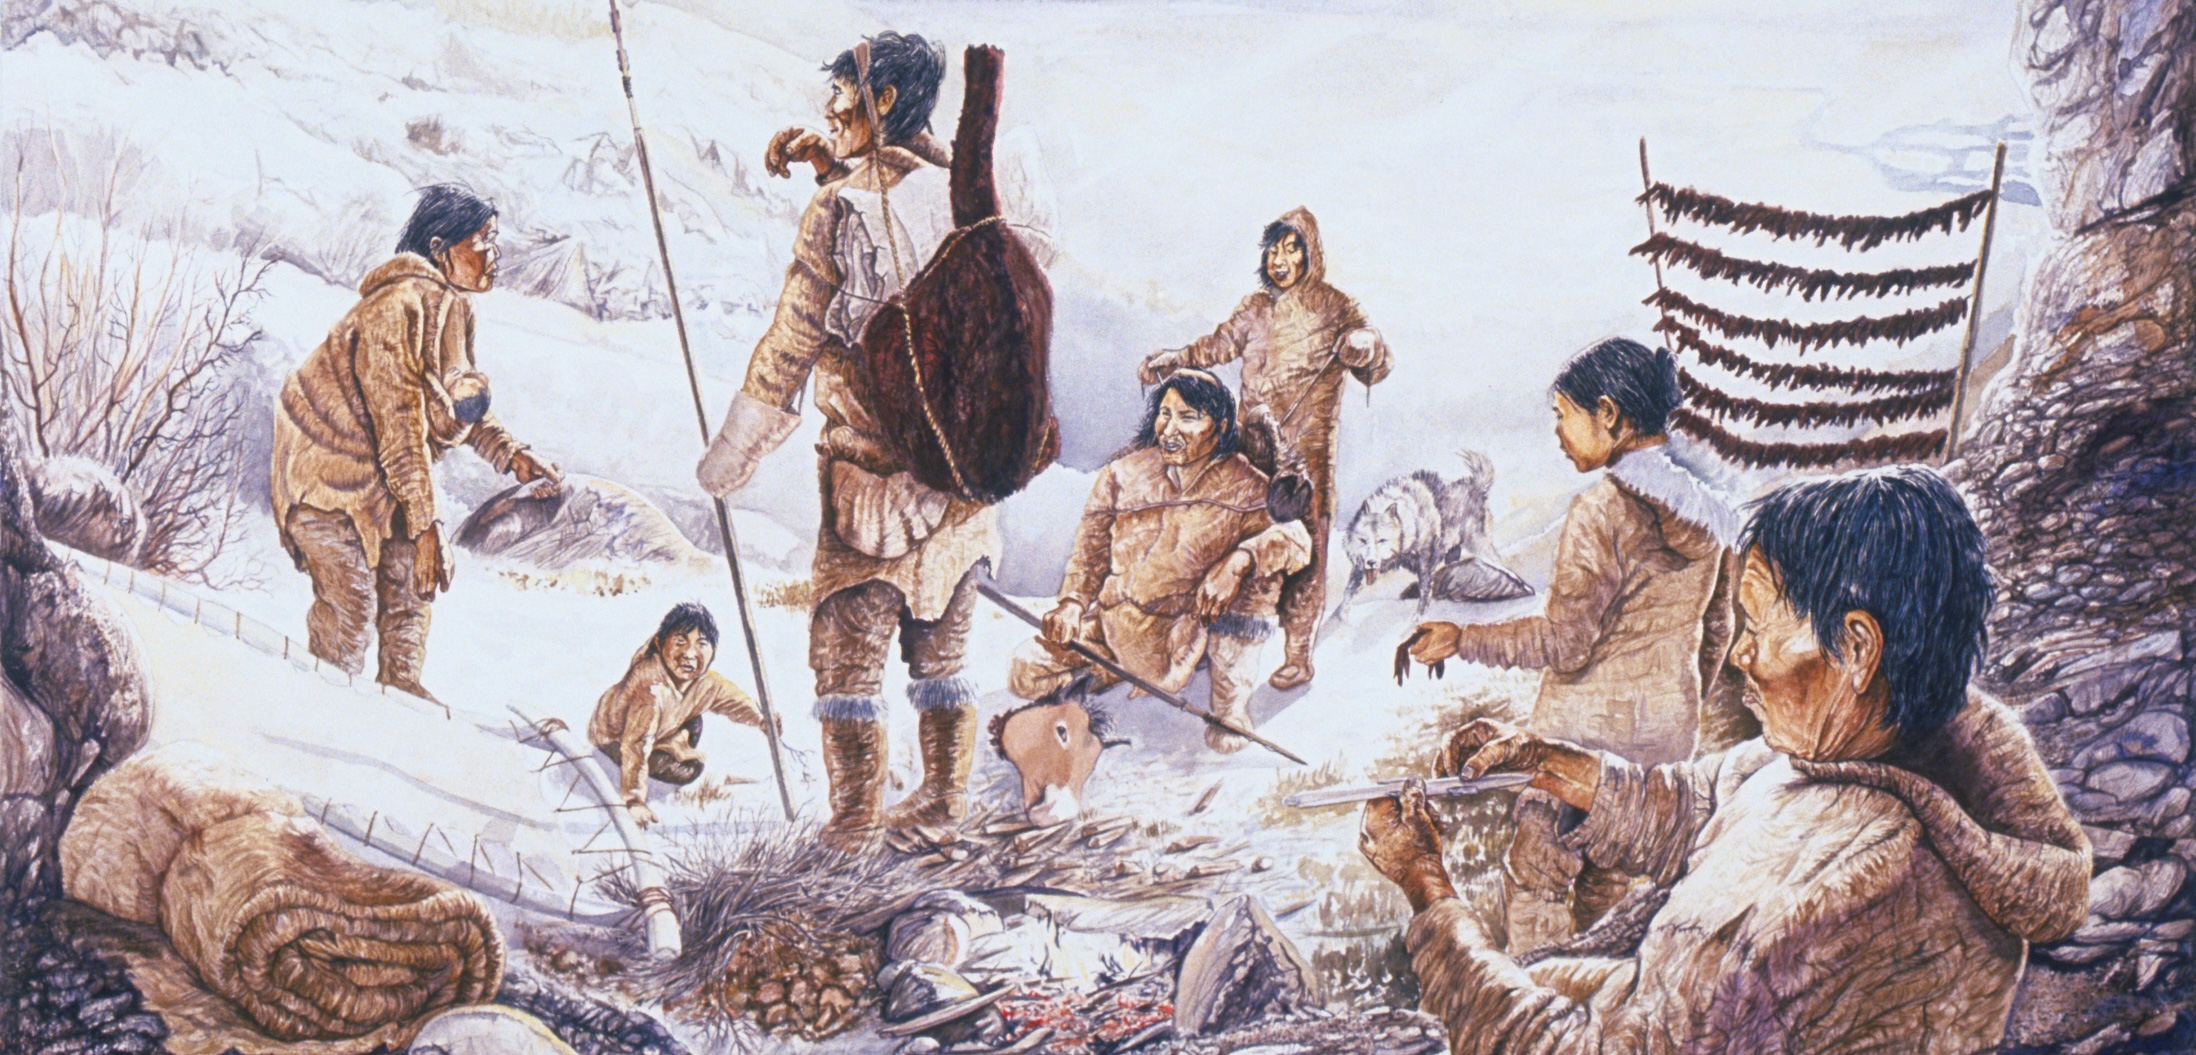 illustration of a group of hunter gatherers in Baringia